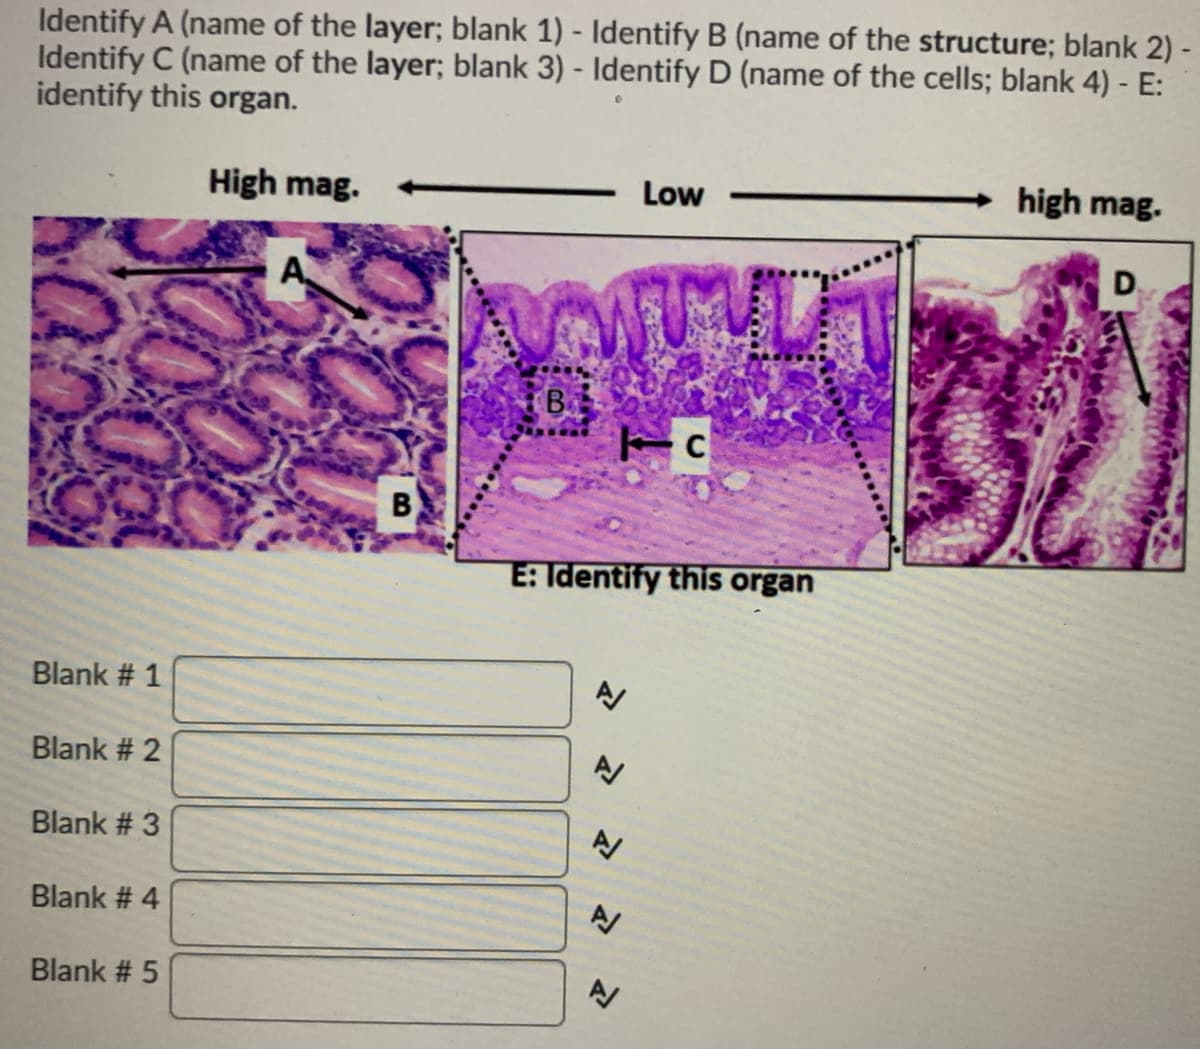 Identify A (name of the layer; blank 1) - Identify B (name of the structure; blank 2) -
Identify C (name of the layer; blank 3) - Identify D (name of the cells; blank 4) - E:
identify this organ.
High mag.
Low
high mag.
D.
B
B
E: Identify this organ
Blank # 1
Blank # 2
Blank # 3
Blank # 4
Blank # 5
